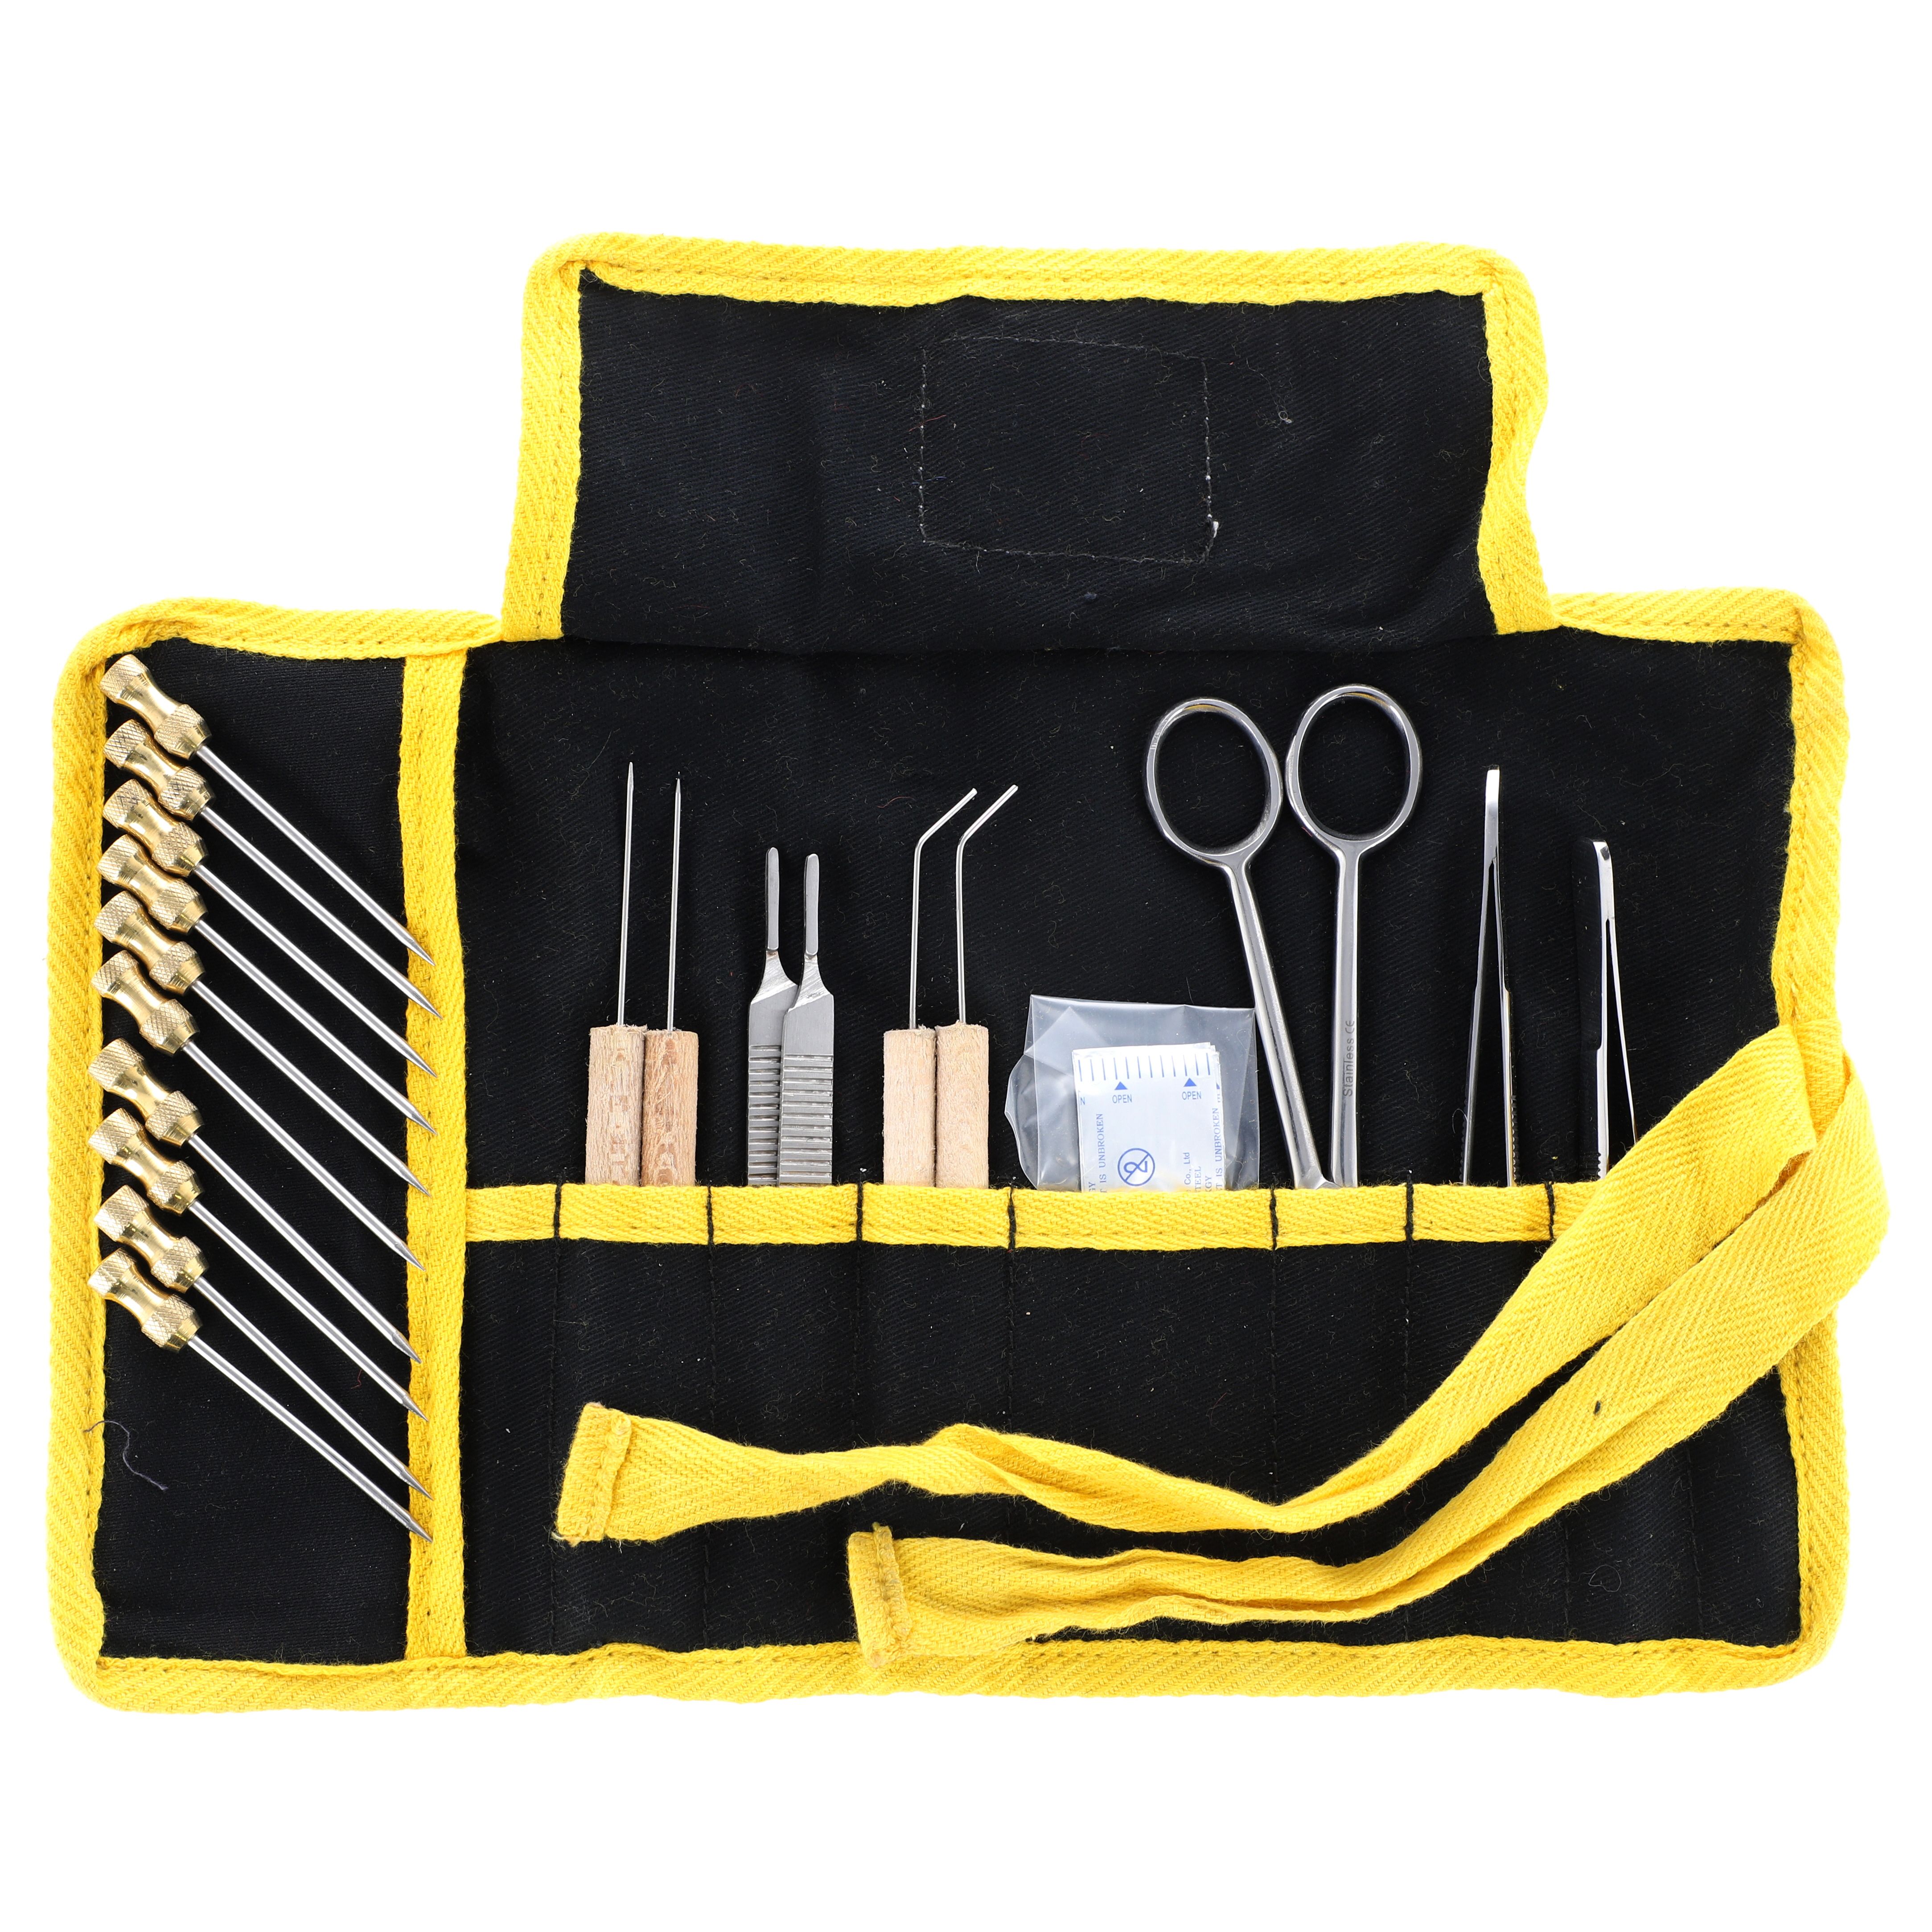 gross anatomy dissection video tools